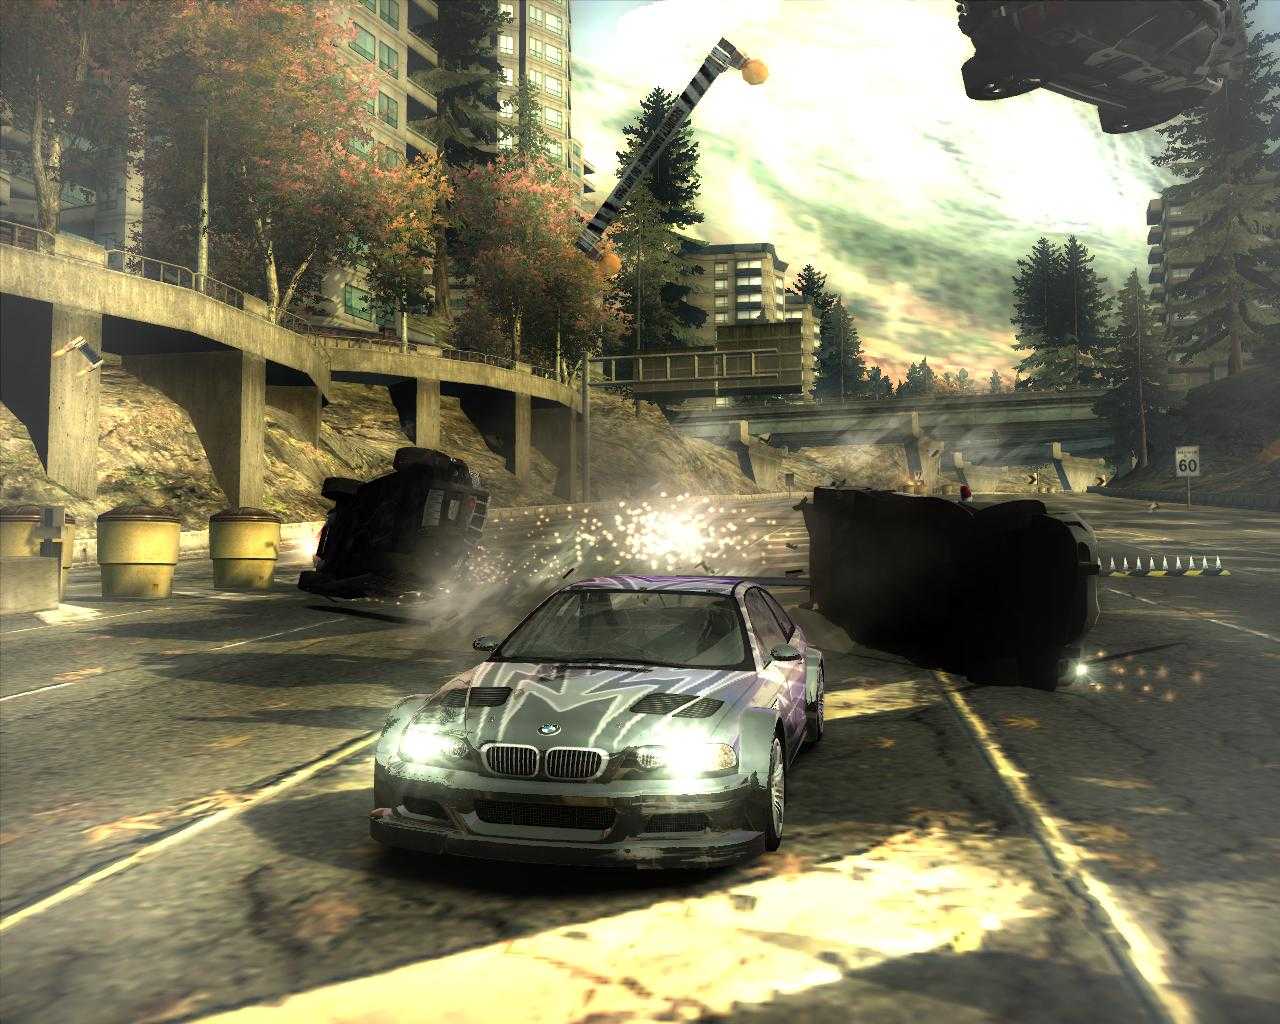 Most wanted hq. Игра NFS most wanted 2005. Нфс мост вантед 2005. Гонки NFS most wanted 2005. NFS мост вантед 2005.